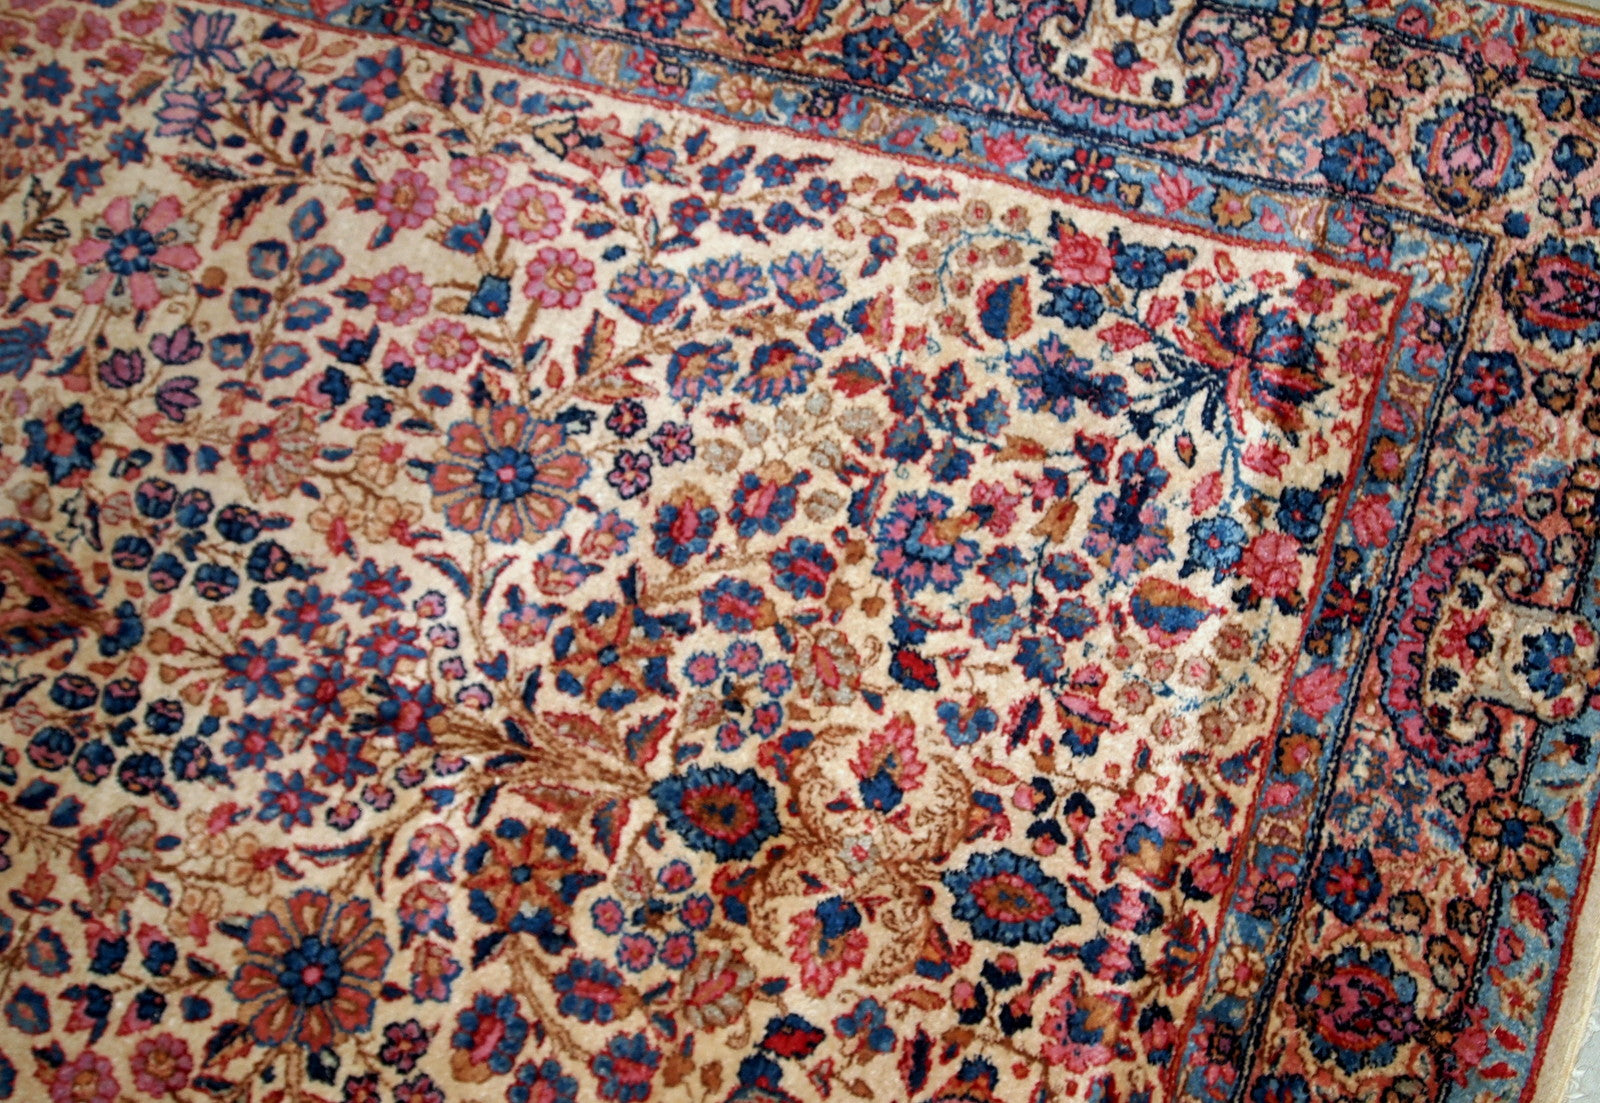 Hand-woven antique Kerman rug in original good condition, from the beginning of 20th century. The rug is in light shades and busy floral design.